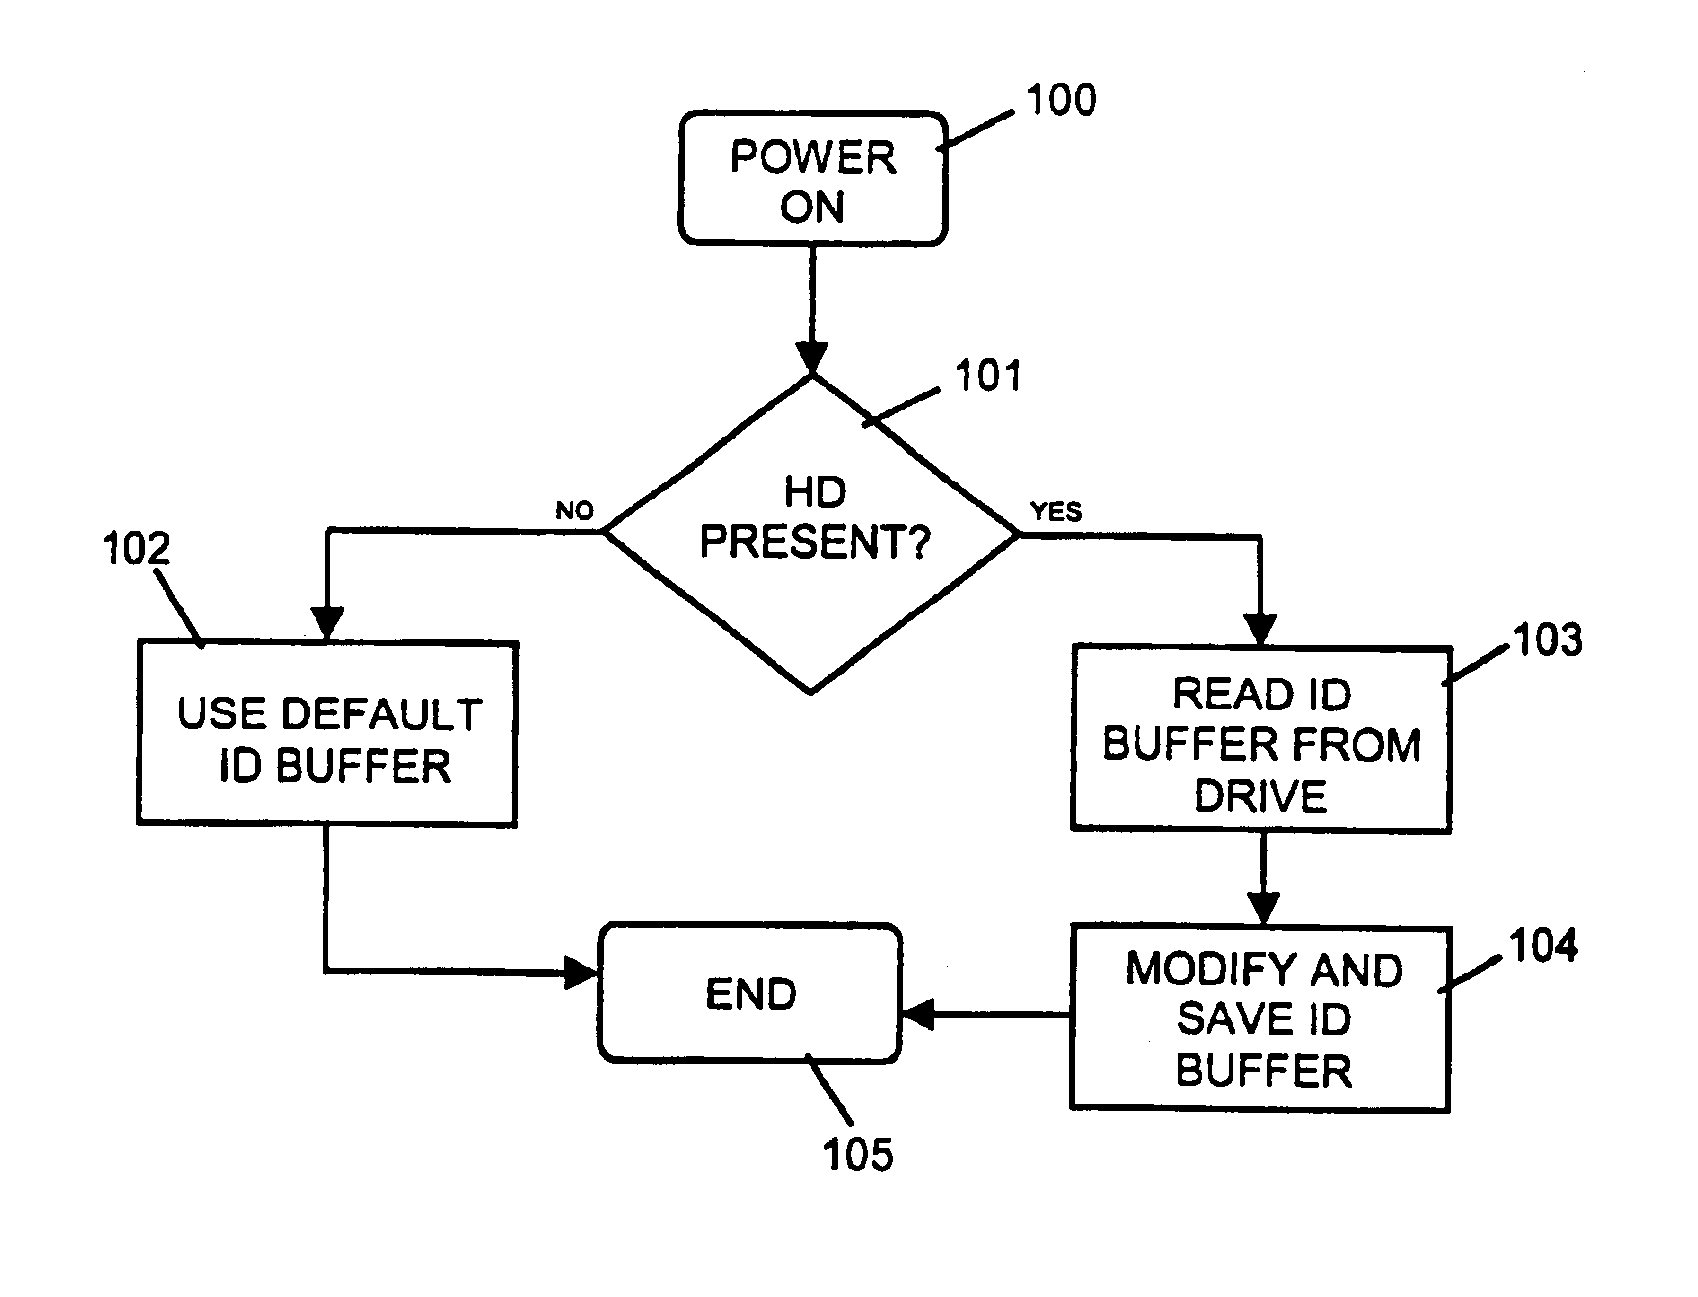 Removable hard drive assembly, computer with a removable hard disk drive, method of initializing and operating a removable hard drive